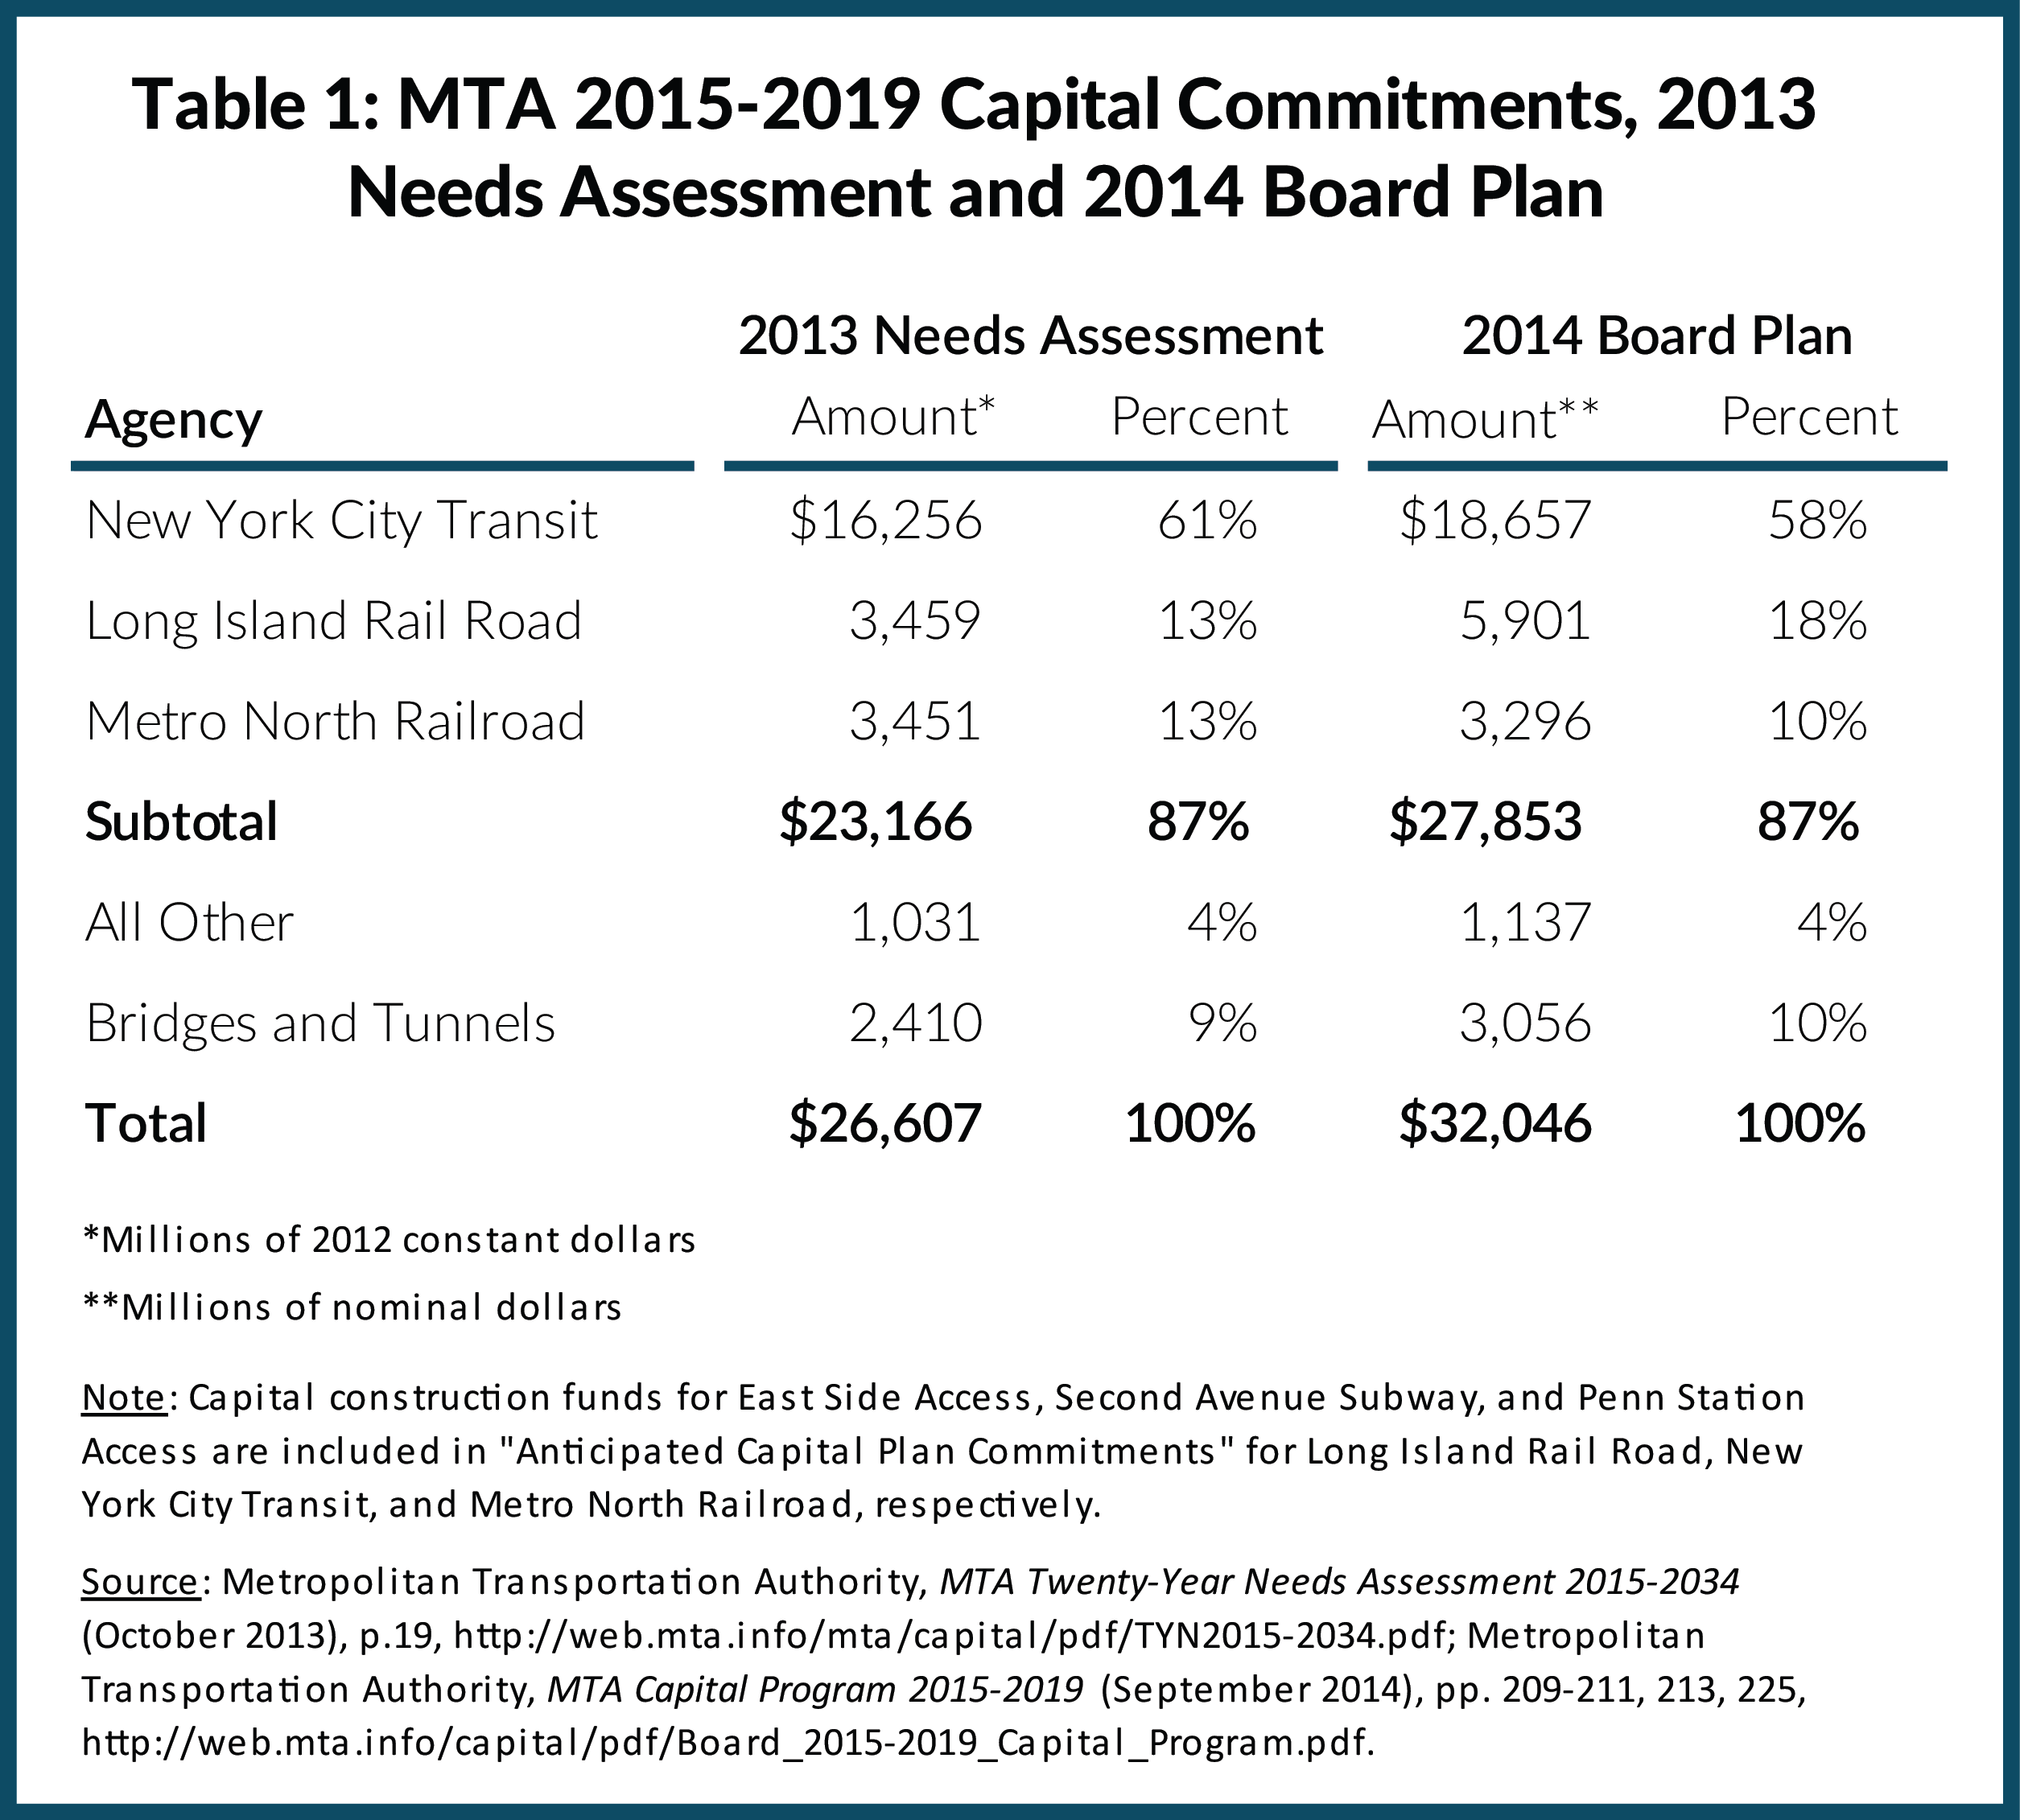 Table 1: MTA 2015-2019 Capital Commitments, 2013 Needs Assessment and 2014 Board Plan